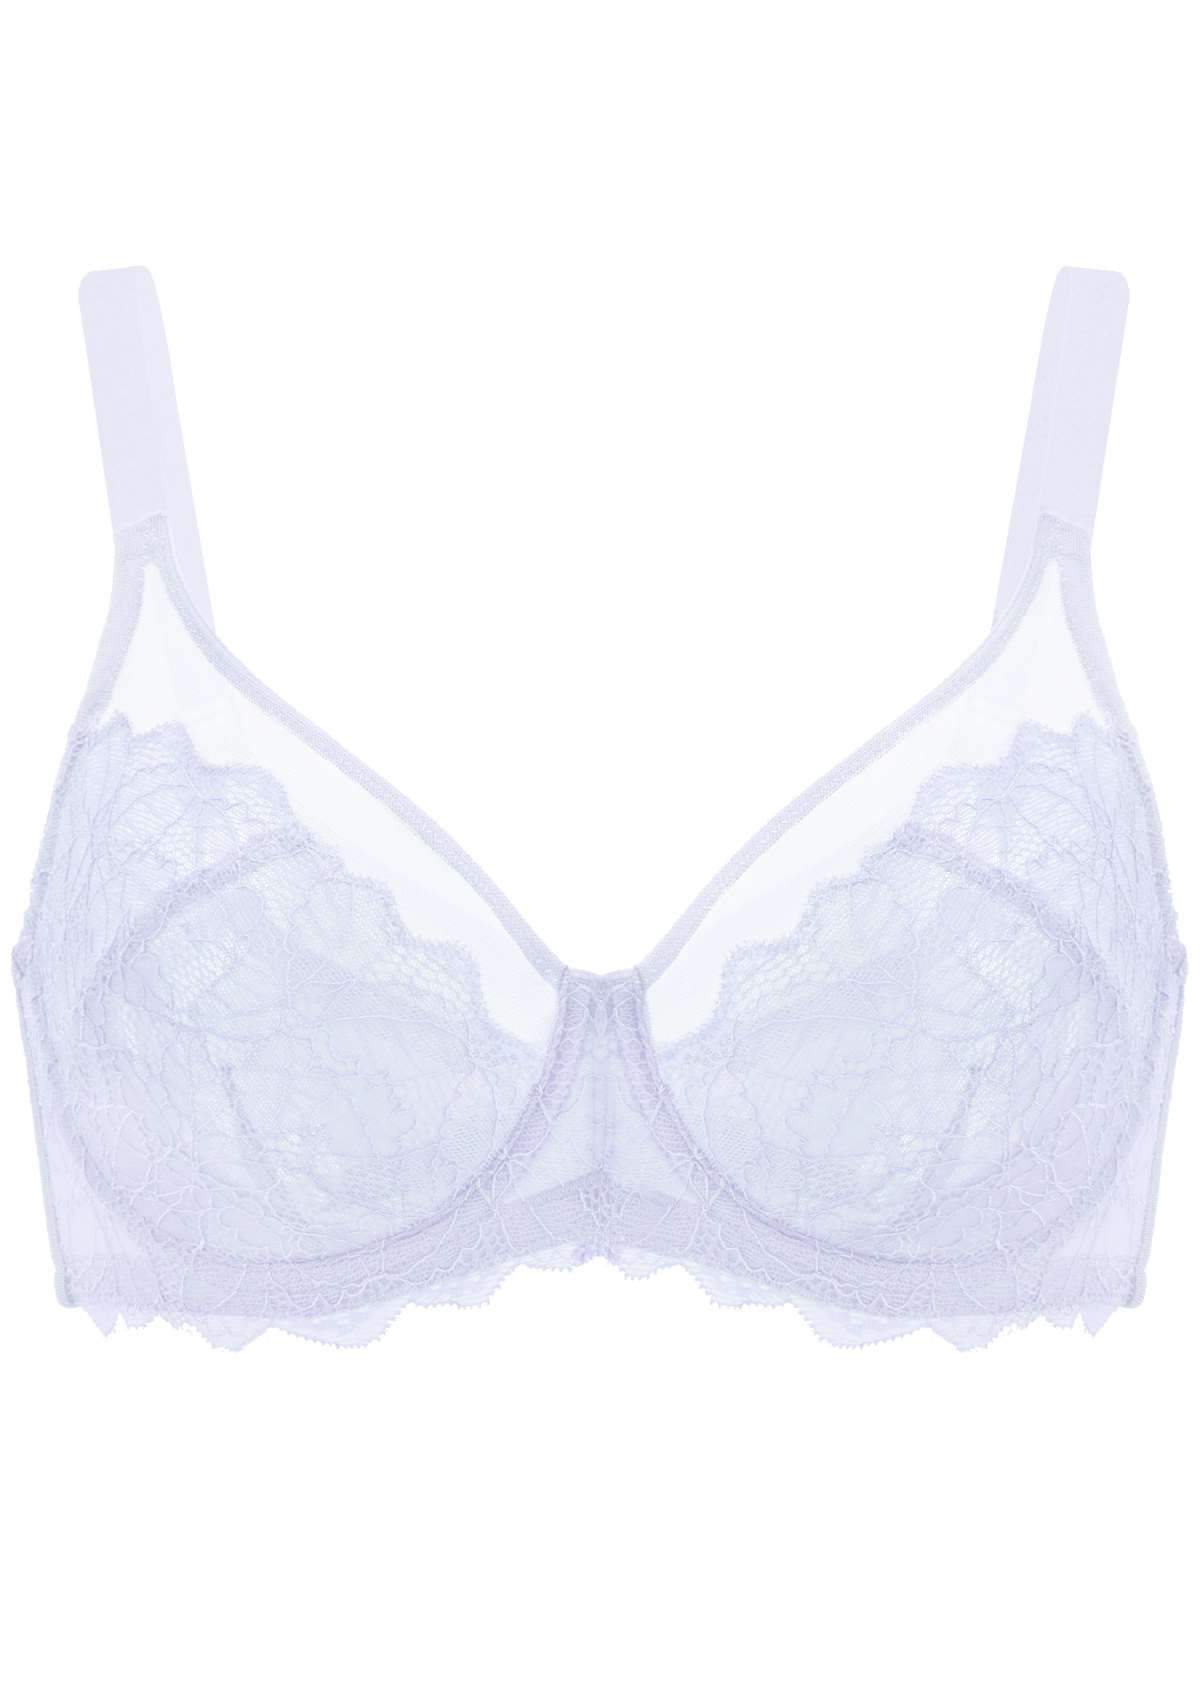 HSIA Wisteria Bra For Lift And Support - Full Coverage Minimizer Bra - Light Pink / 38 / C